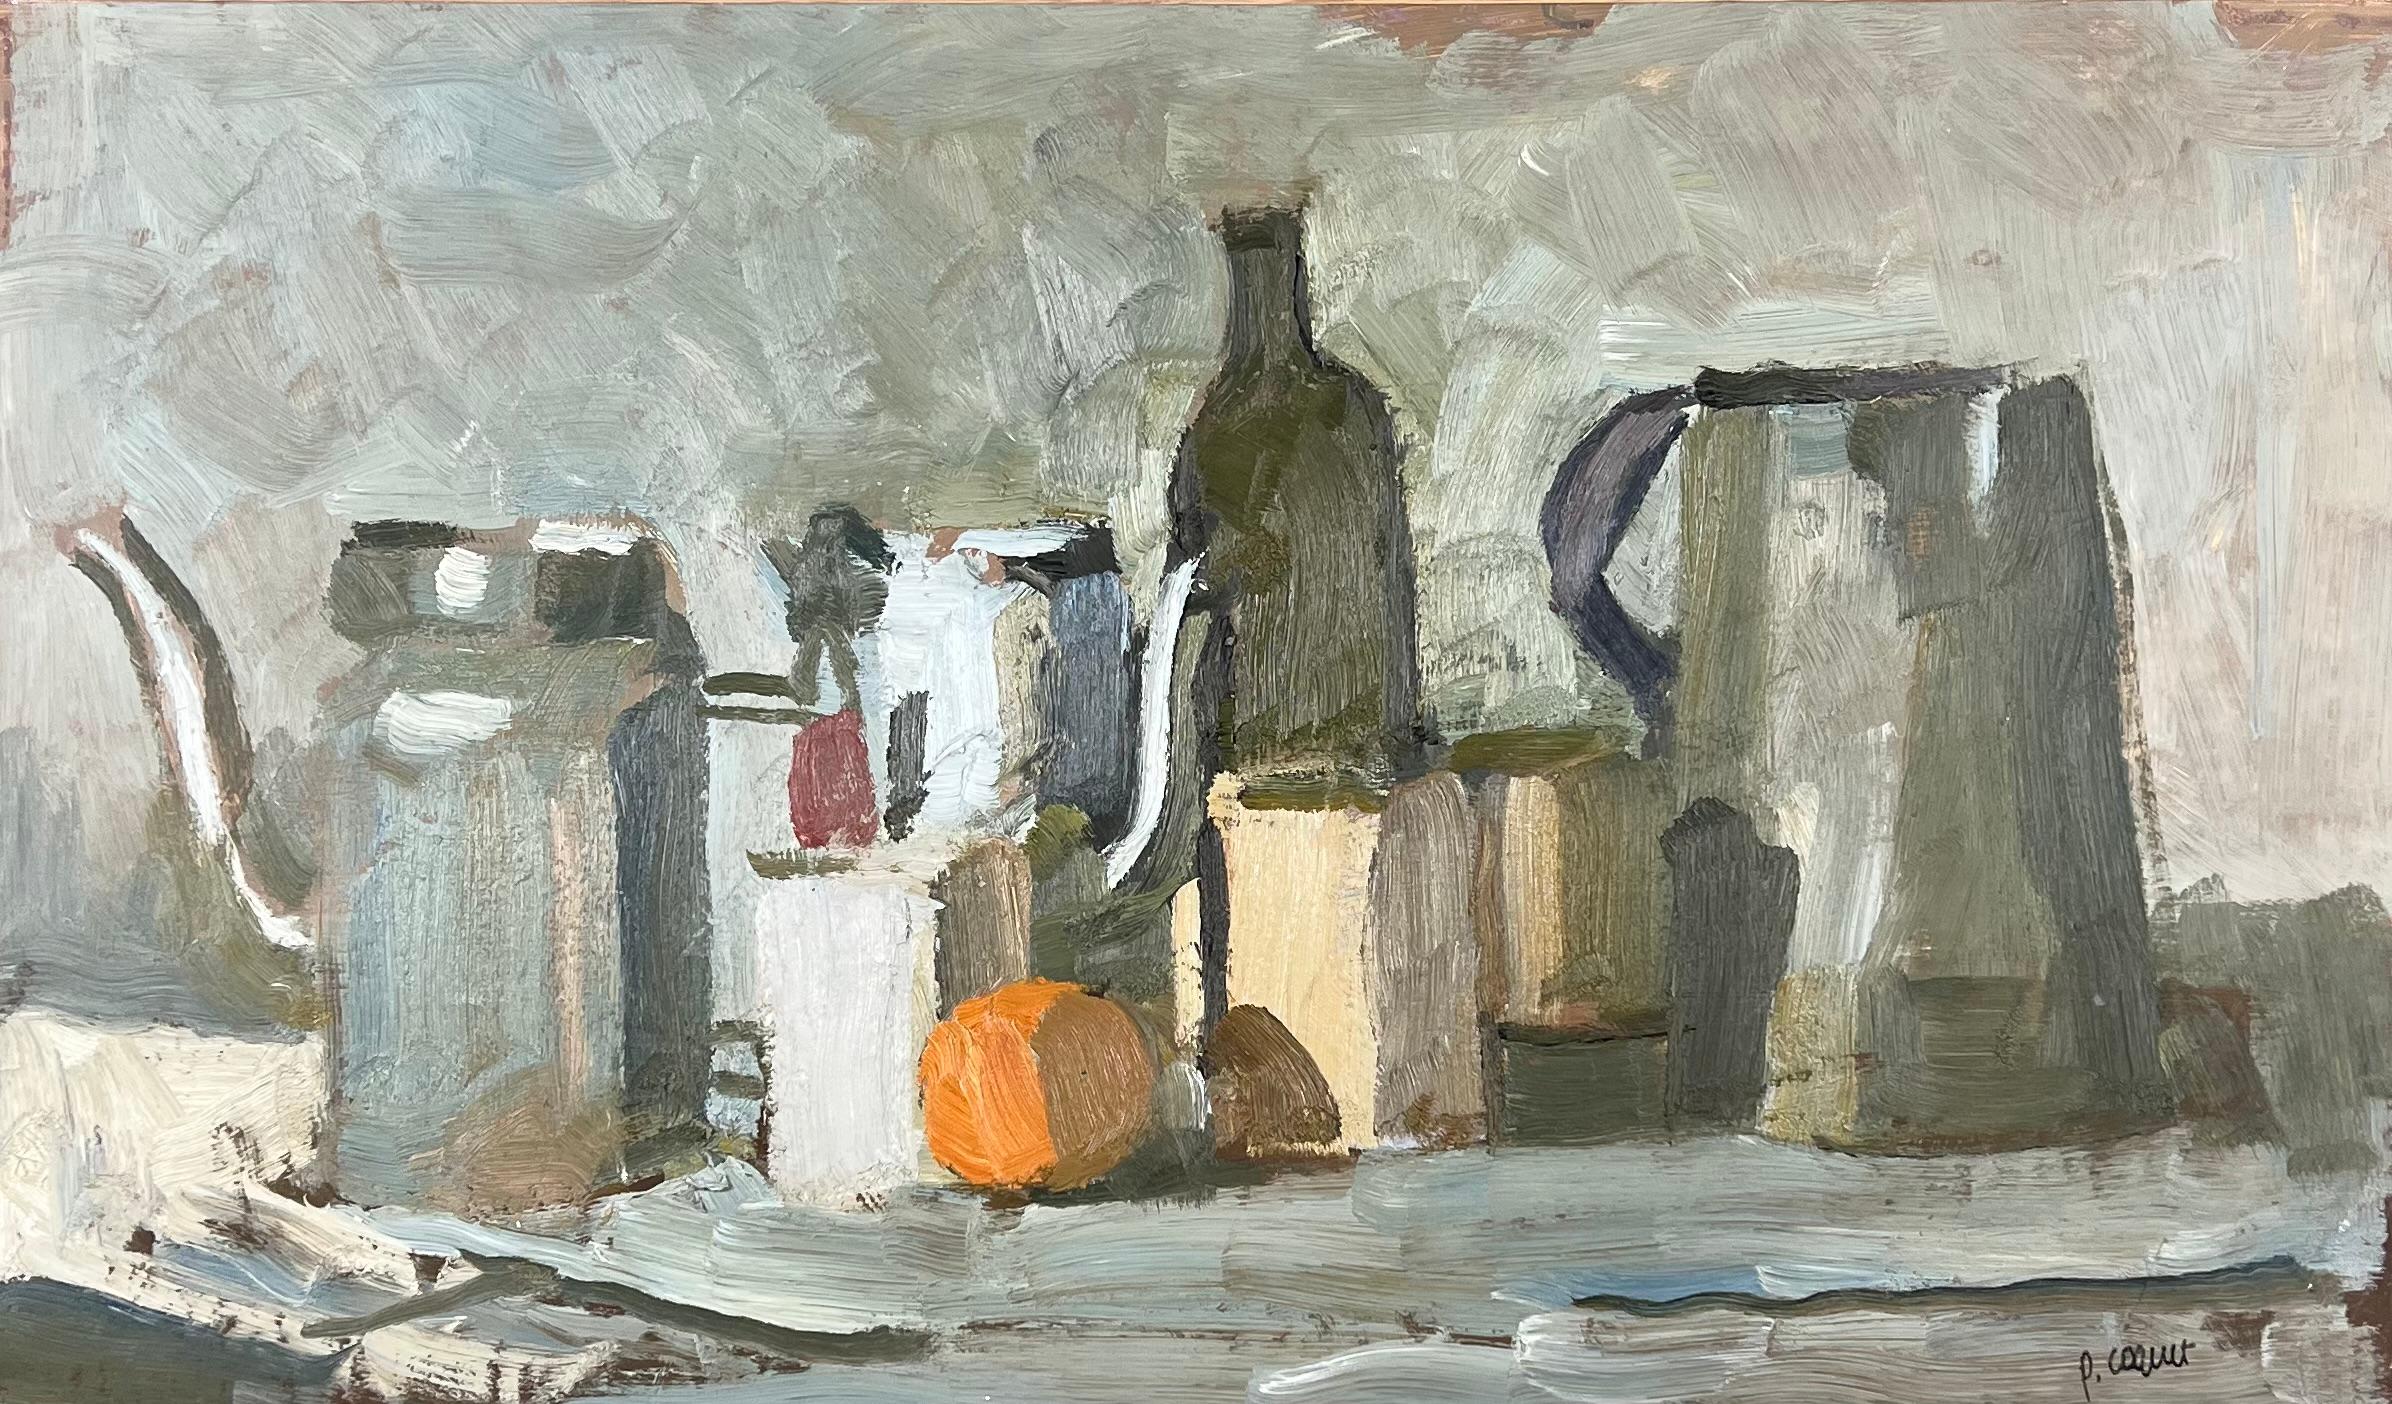 Composition with jugs, oil painting by Pierre Coquet
Reference number F486
Framed with a natural oak floated frame
43 x 72 x 2 cm (48 x 77 x 3,5 cm frame included)
This work is painted with oil on a paper that is laid on a canvas and placed in a